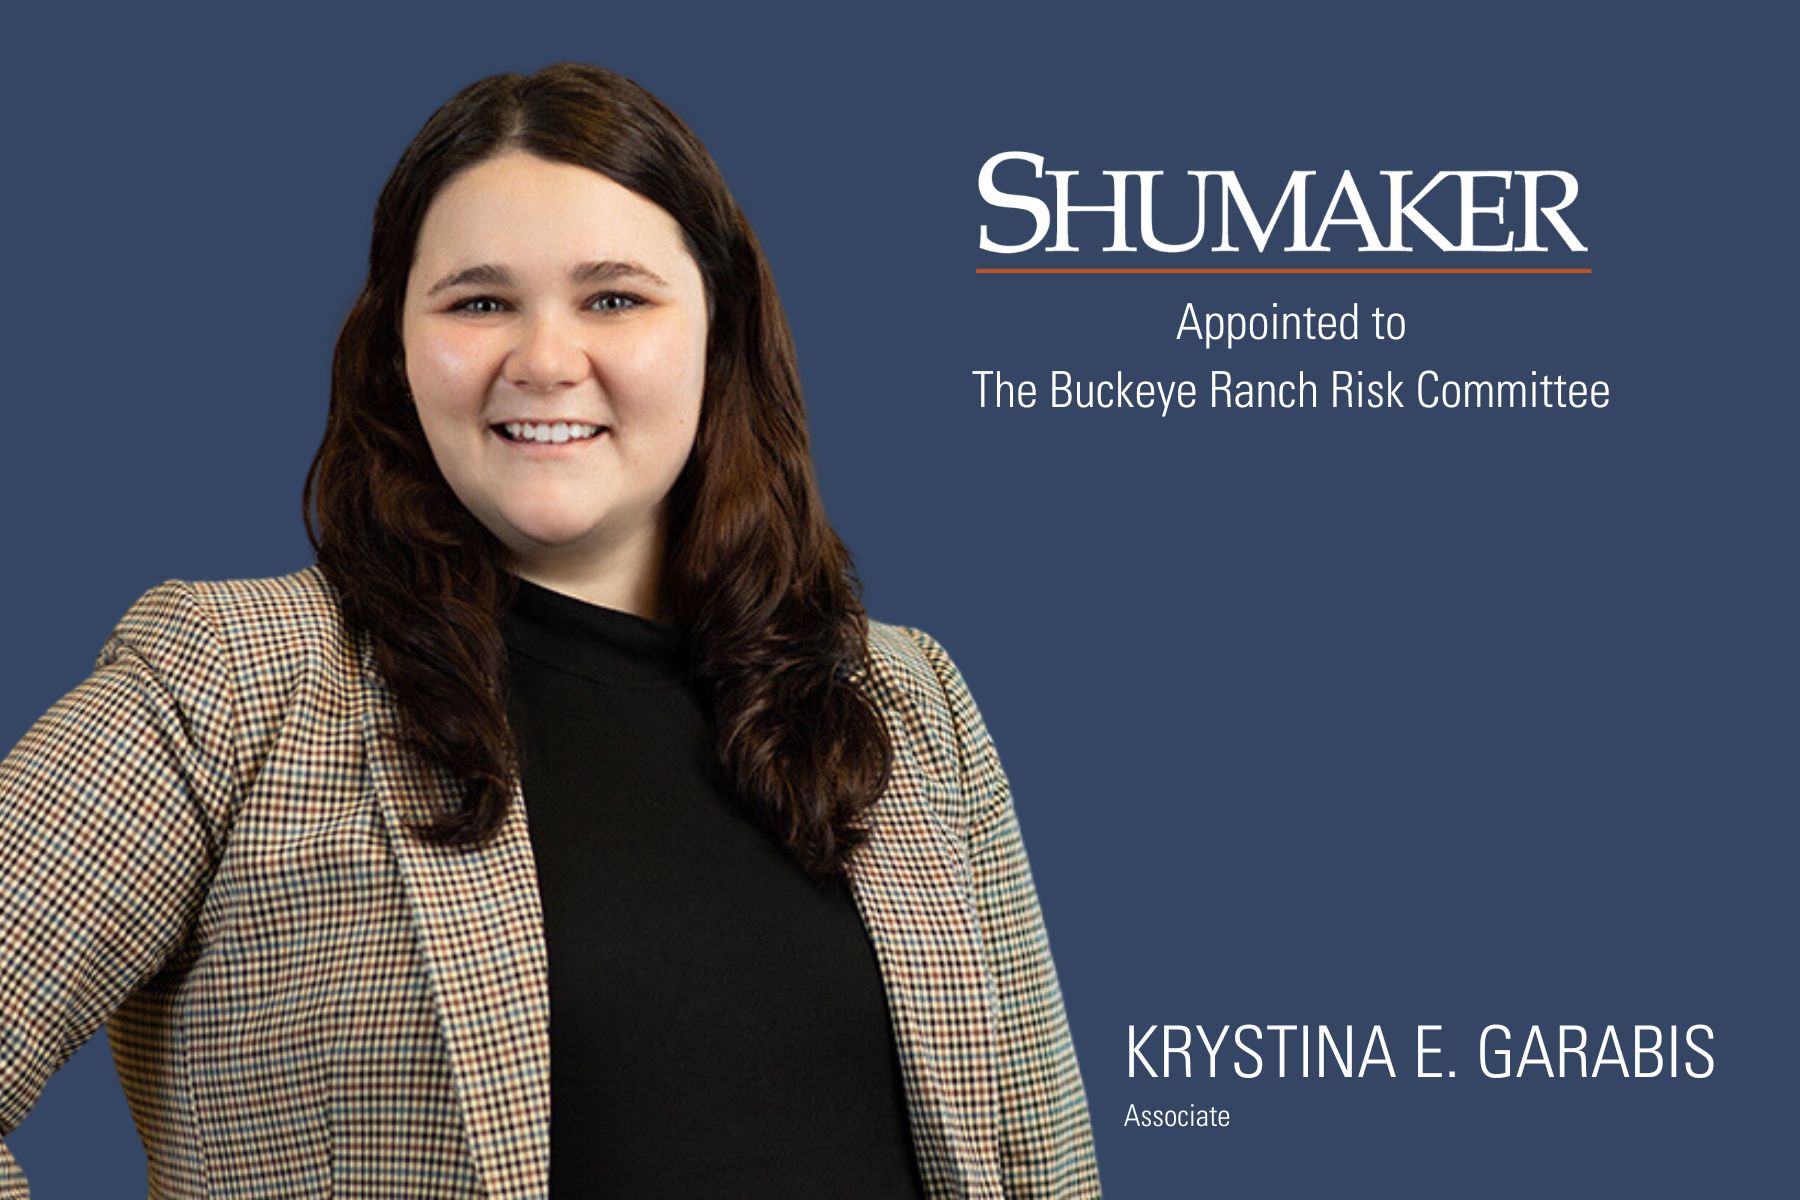 Krystina E. Garabis Appointed to The Buckeye Ranch Risk Committee